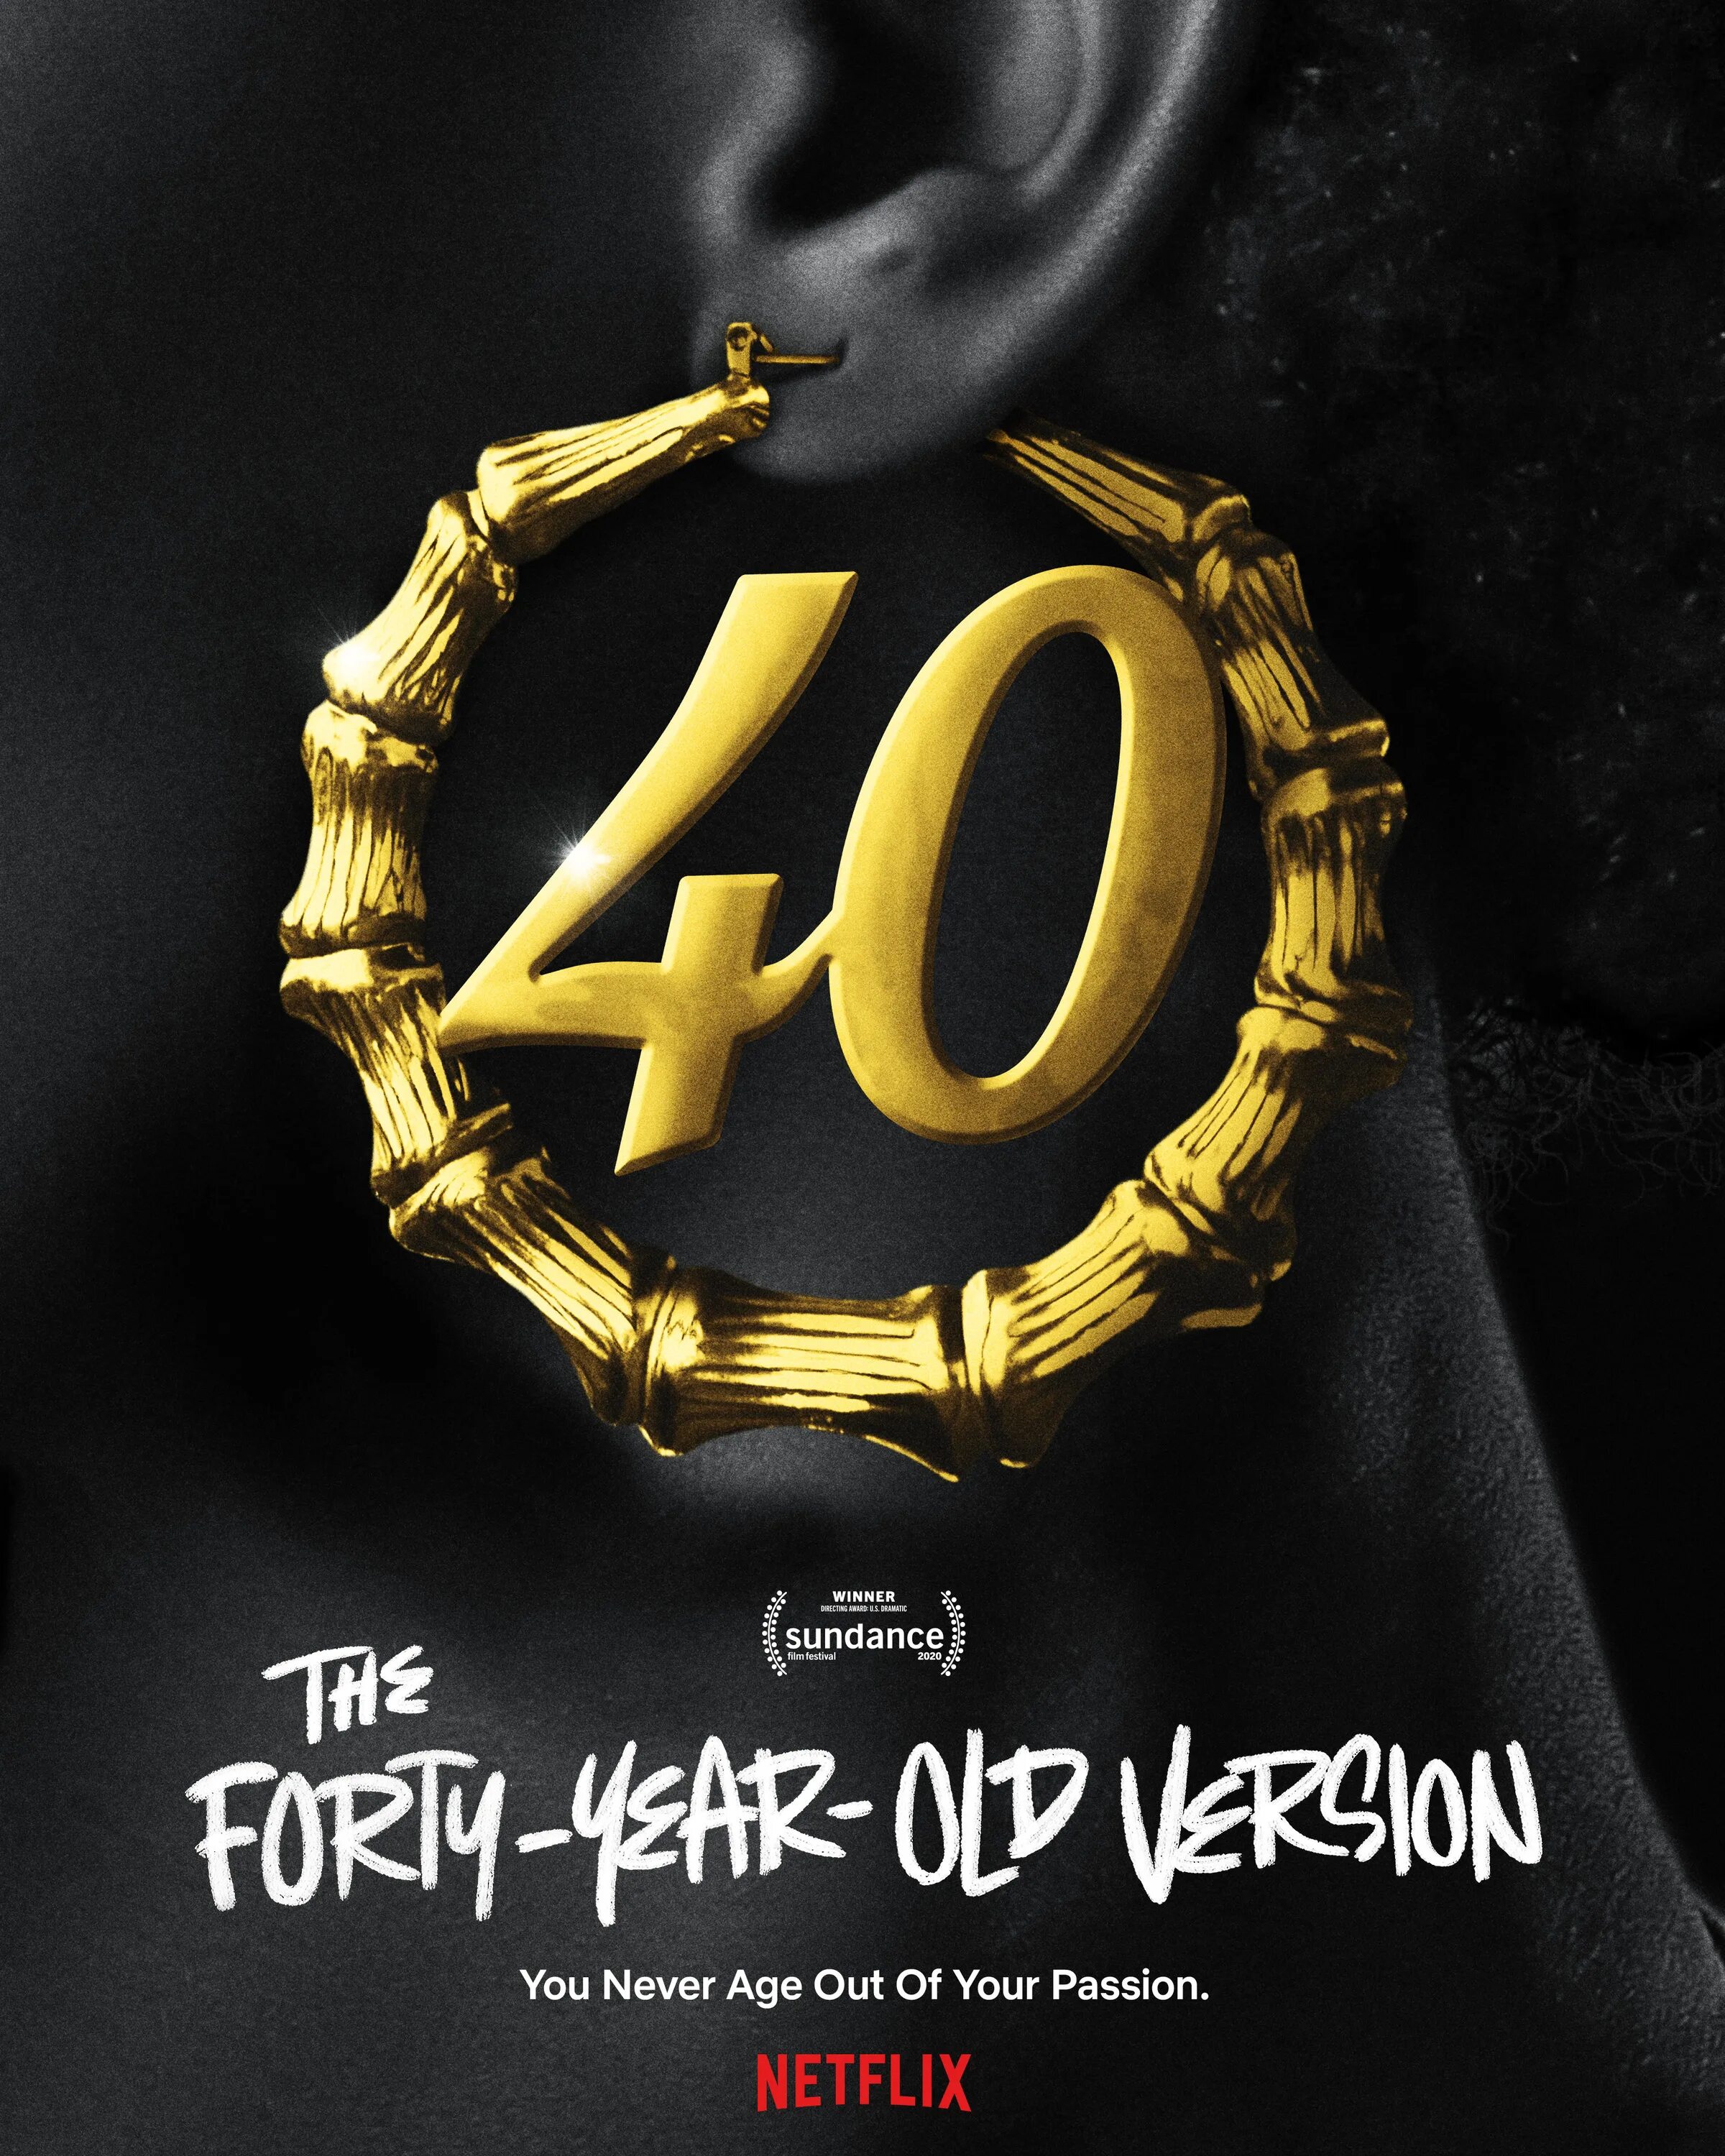 40 years of being. The Forty-year-old Version. 40 Years. The Forty Thirf.